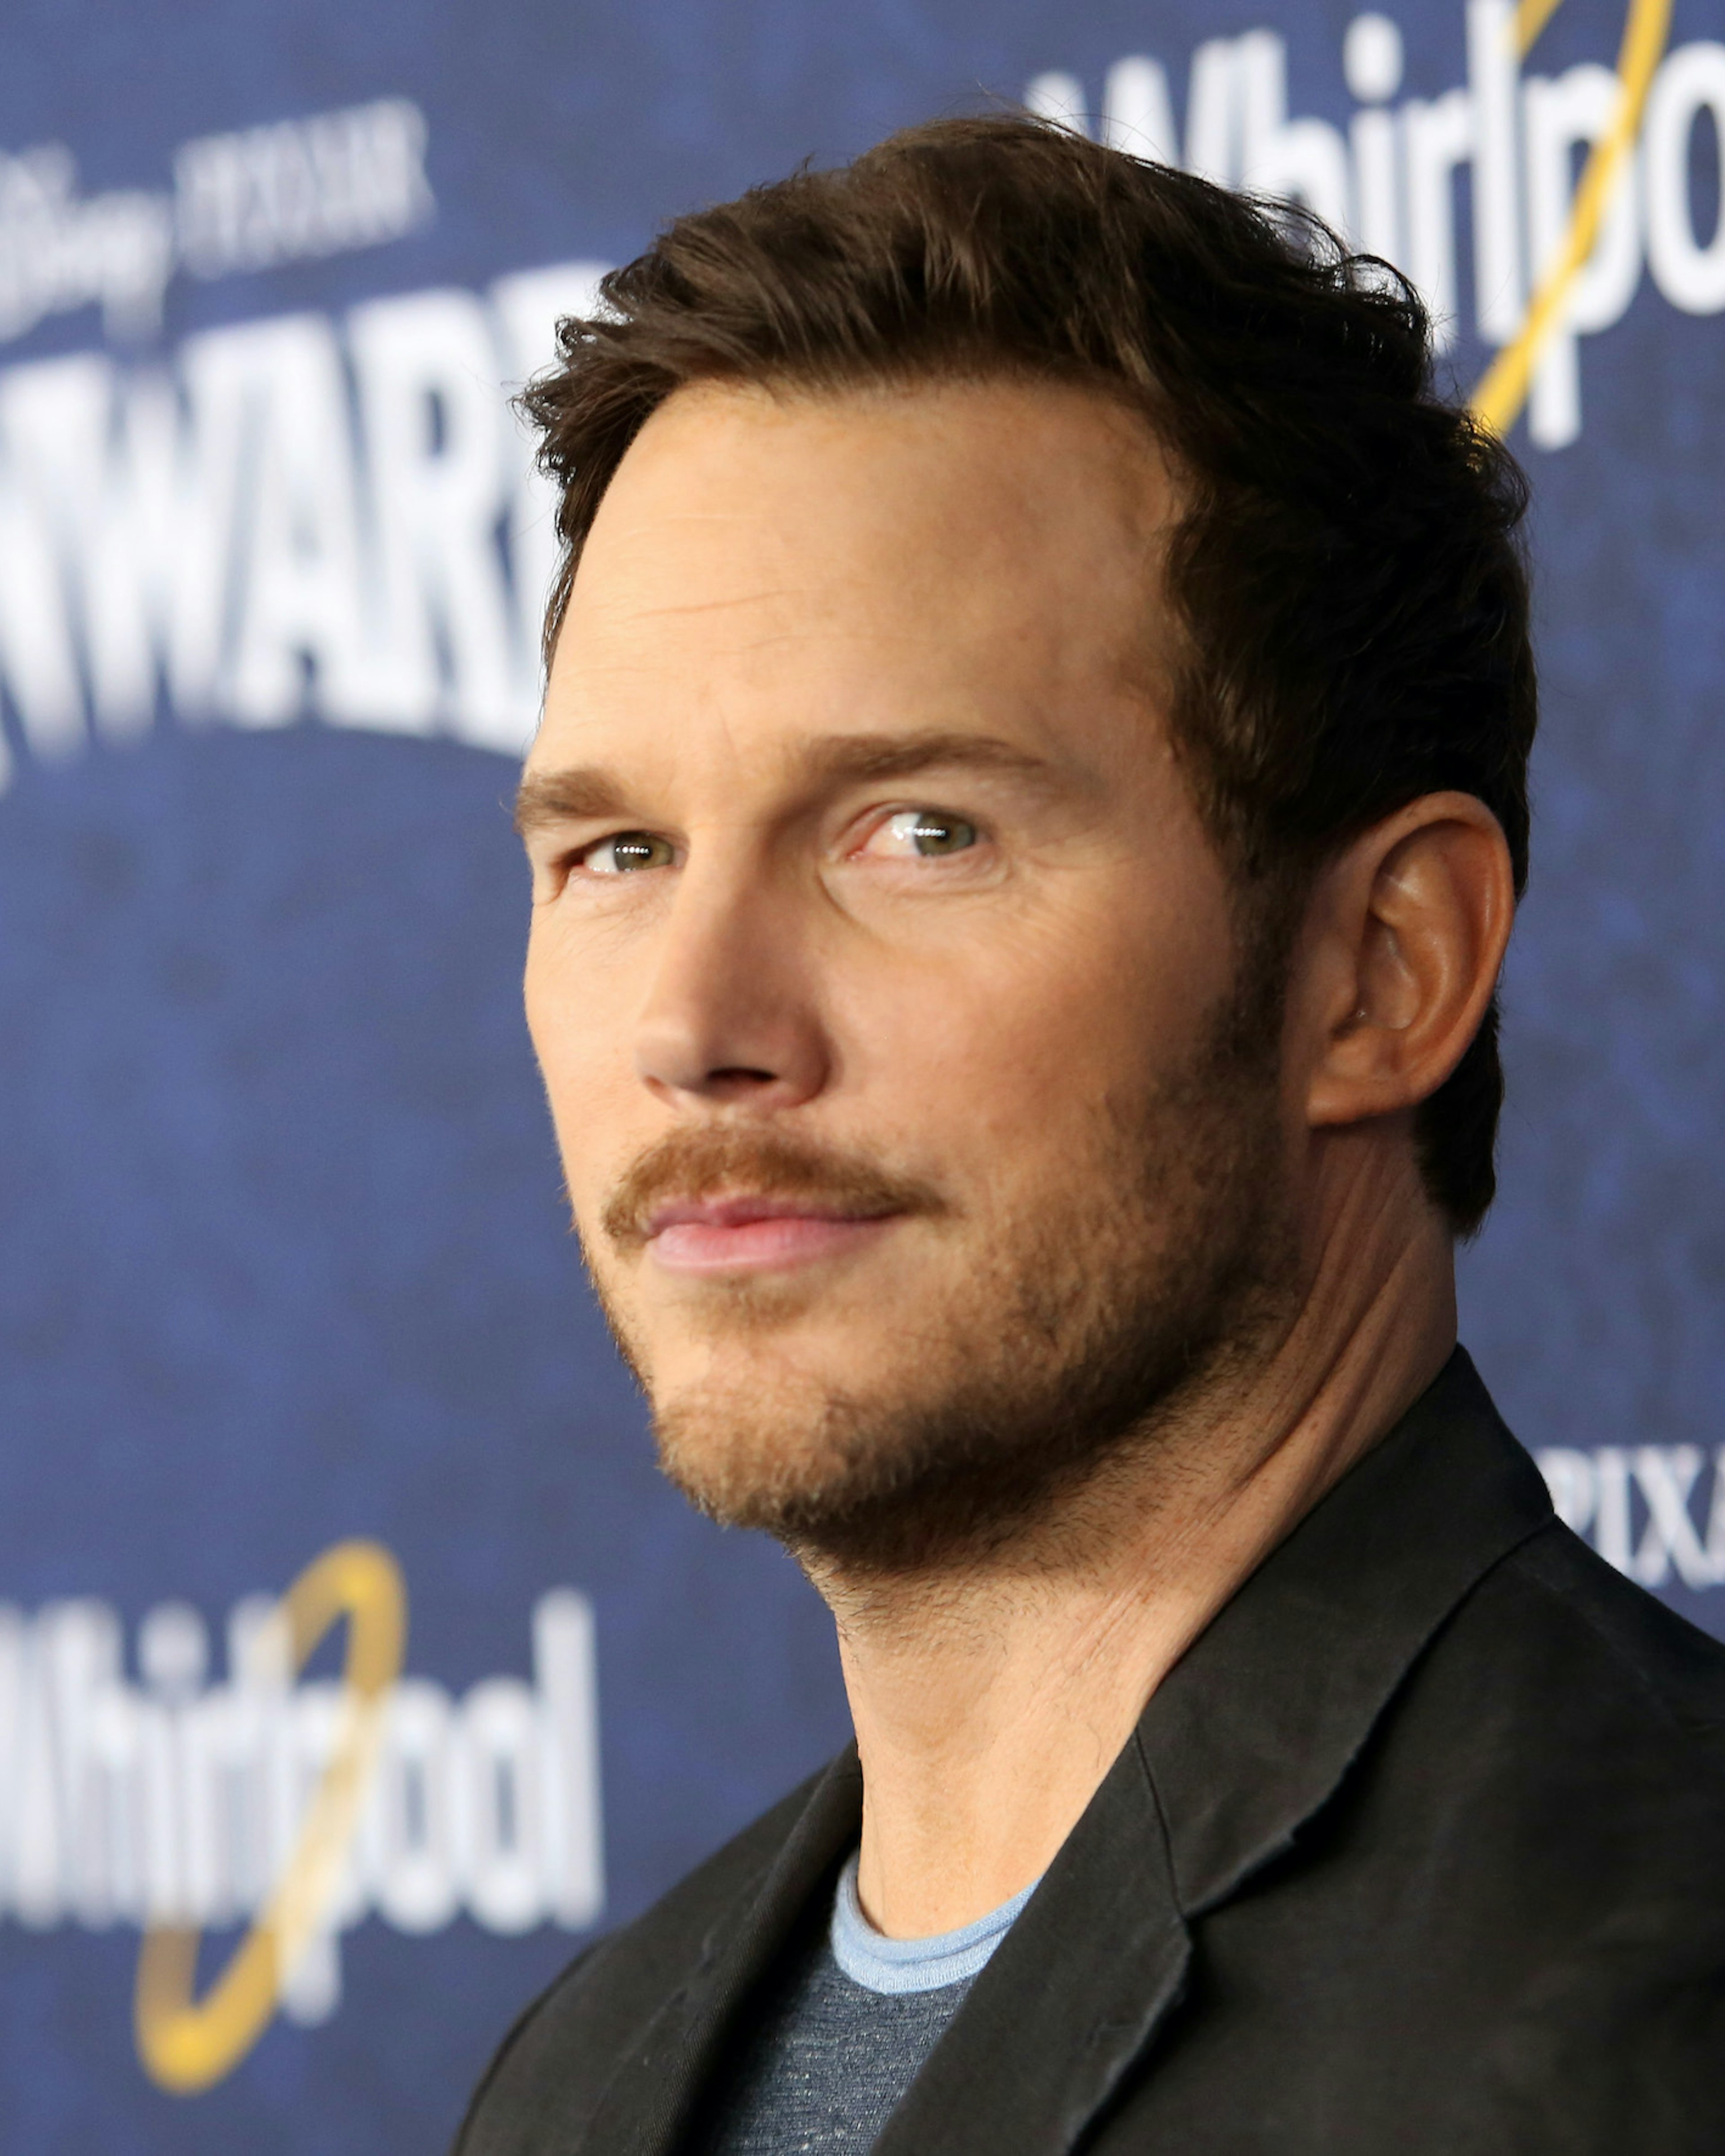 Chris Pratt attends the world premiere of Disney and Pixar's ONWARD at the El Capitan Theatre on February 18, 2020 in Hollywood, California. (Photo by Jesse Grant/Getty Images for Disney)